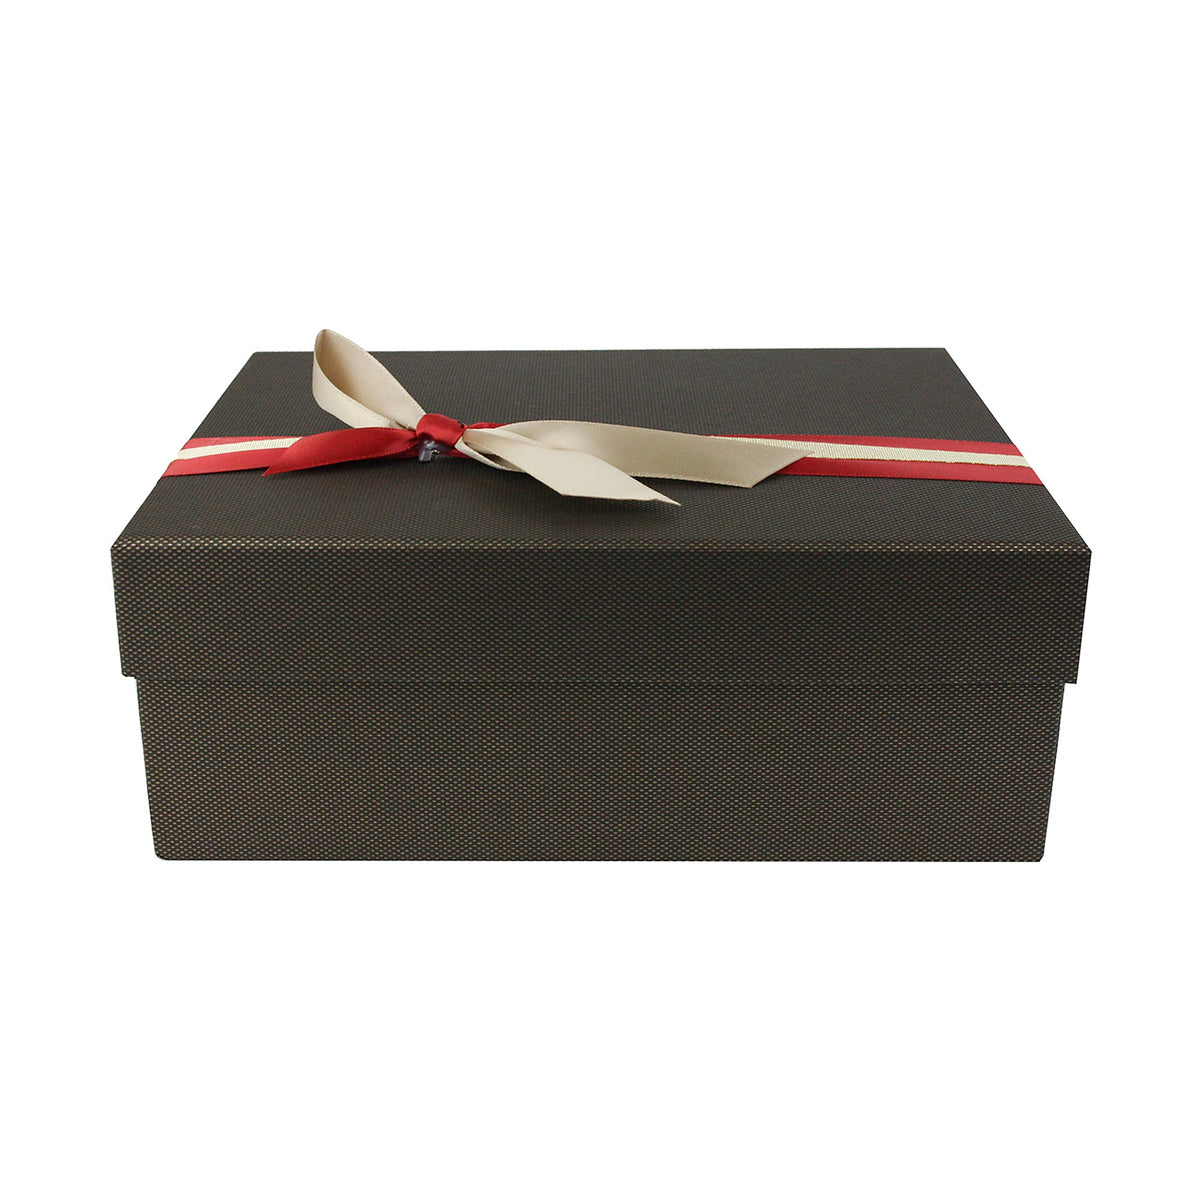 Single Textured Dark Brown Red Gold Bow Gift Box (Sizes Available)